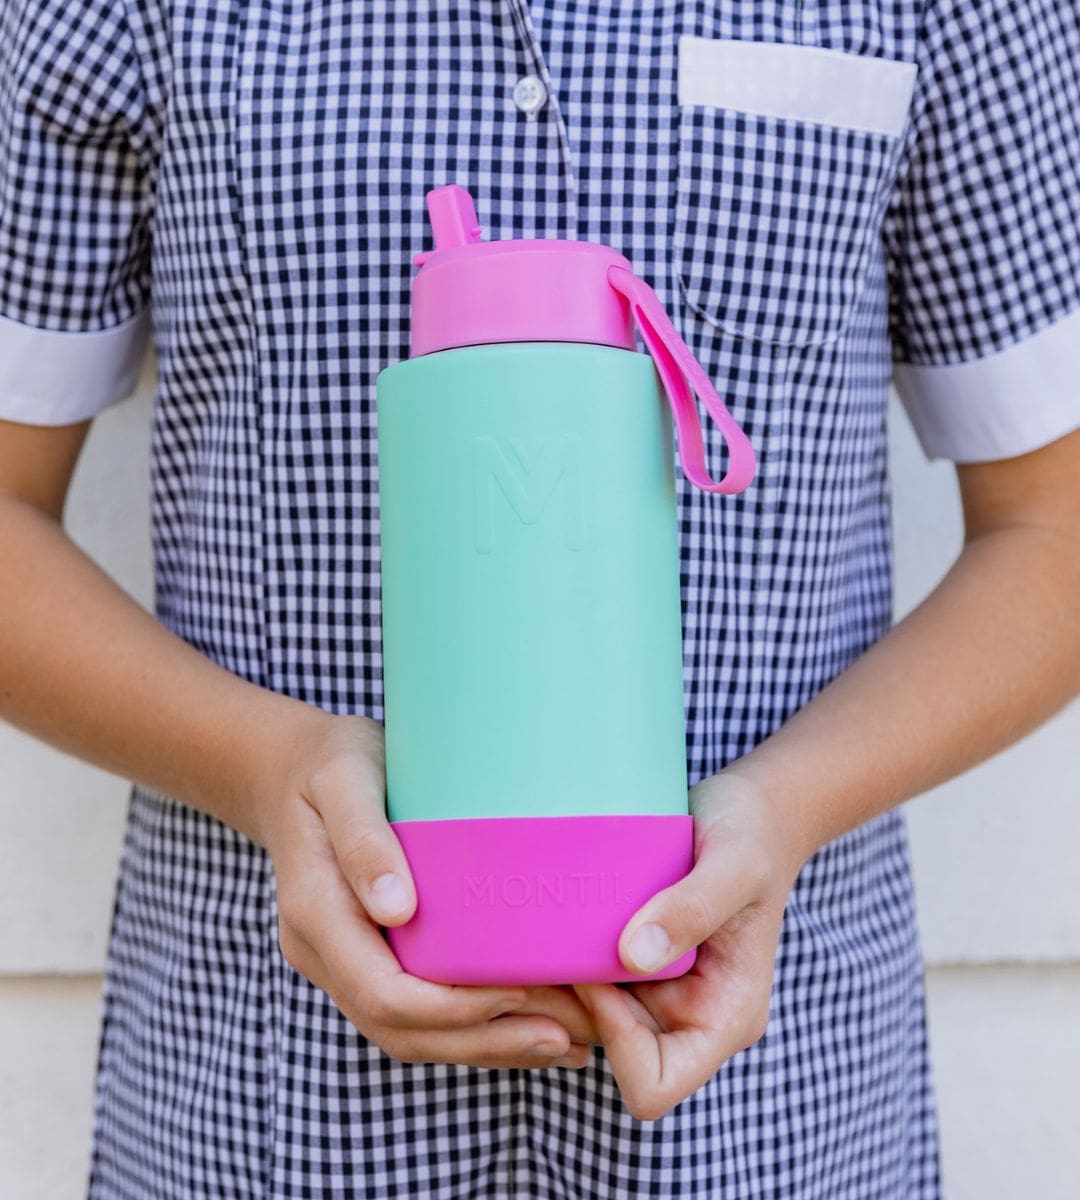 With sizes ranging from 350ml to 1.5L, MontiiCo double-walled insulated drinkware will keep water cold all day, no matter what your thirst!